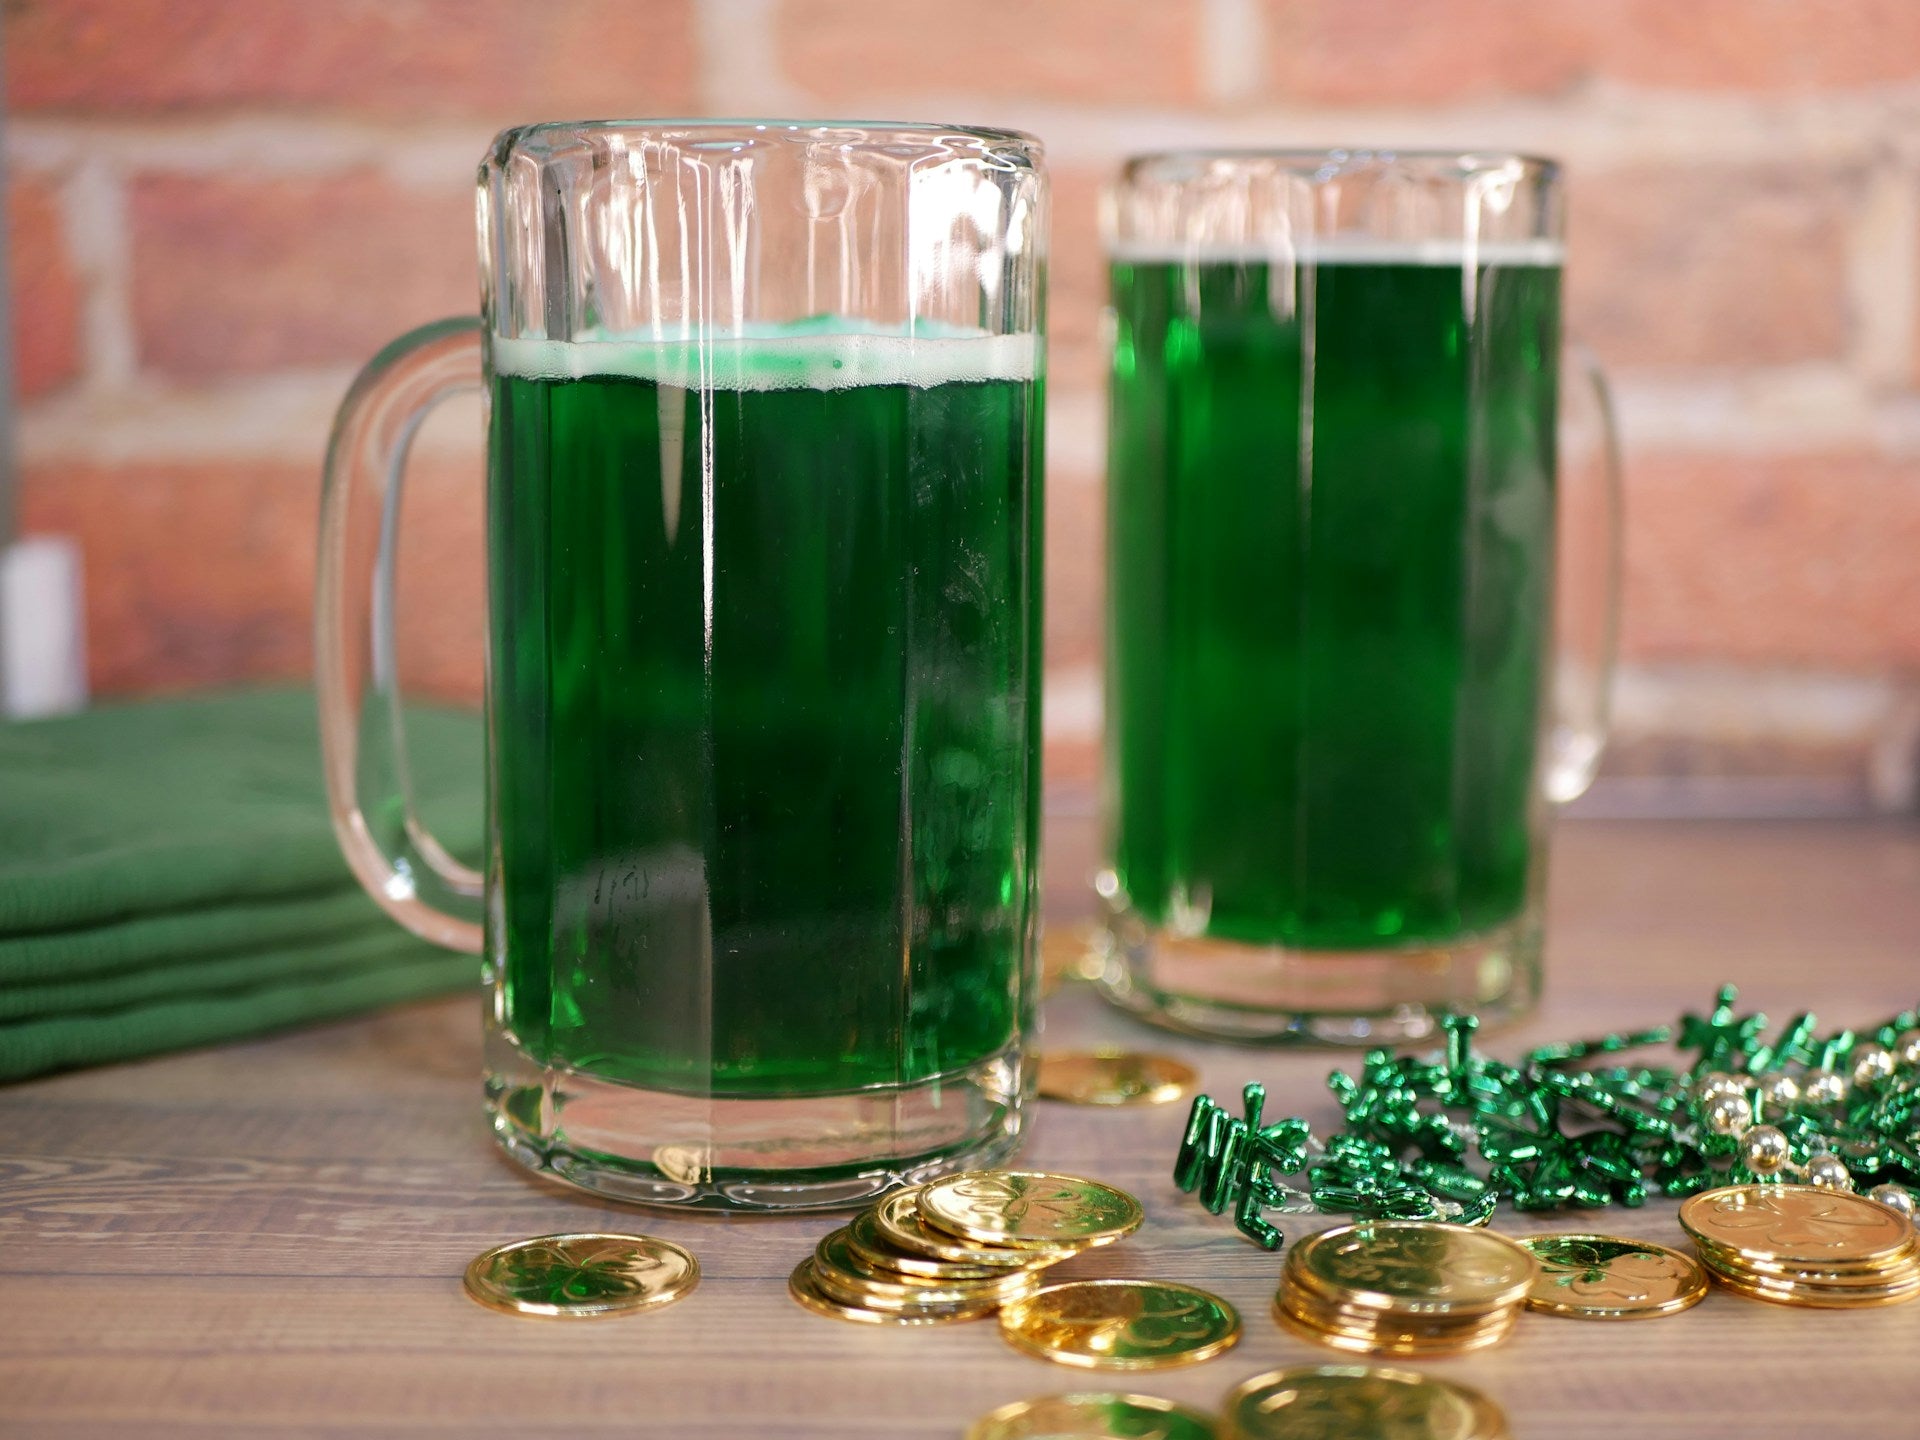 Two pints of green beer in glass mugs beside fake coins and green beads.